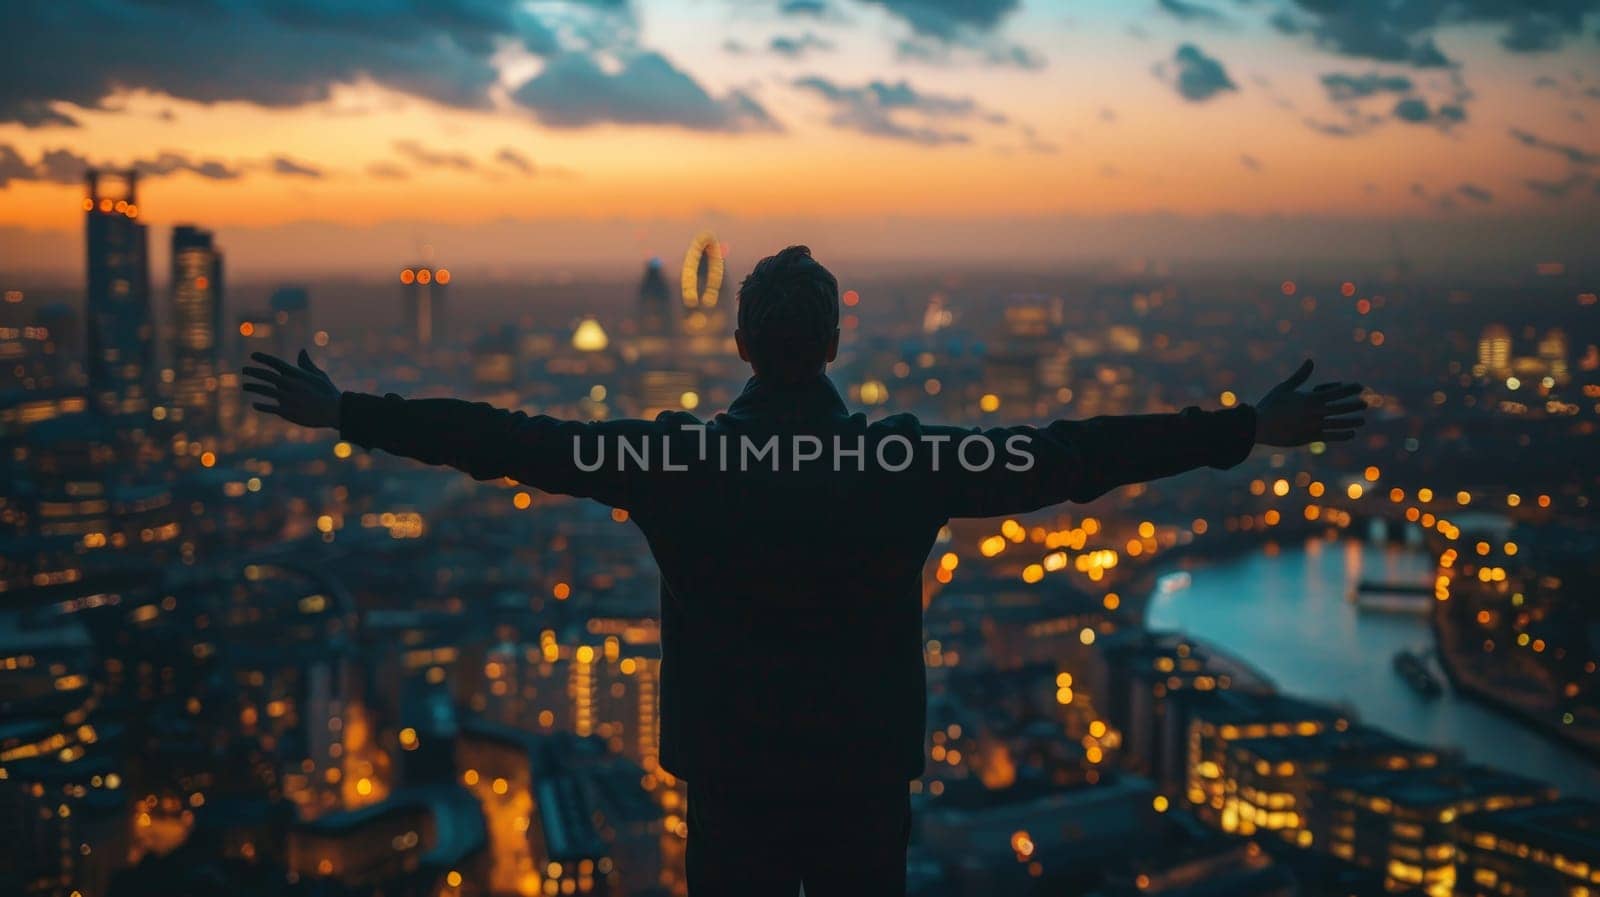 A man is standing in the city with his arms outstretched, looking up at the sky. The city is lit up at night, creating a mood of excitement and wonder